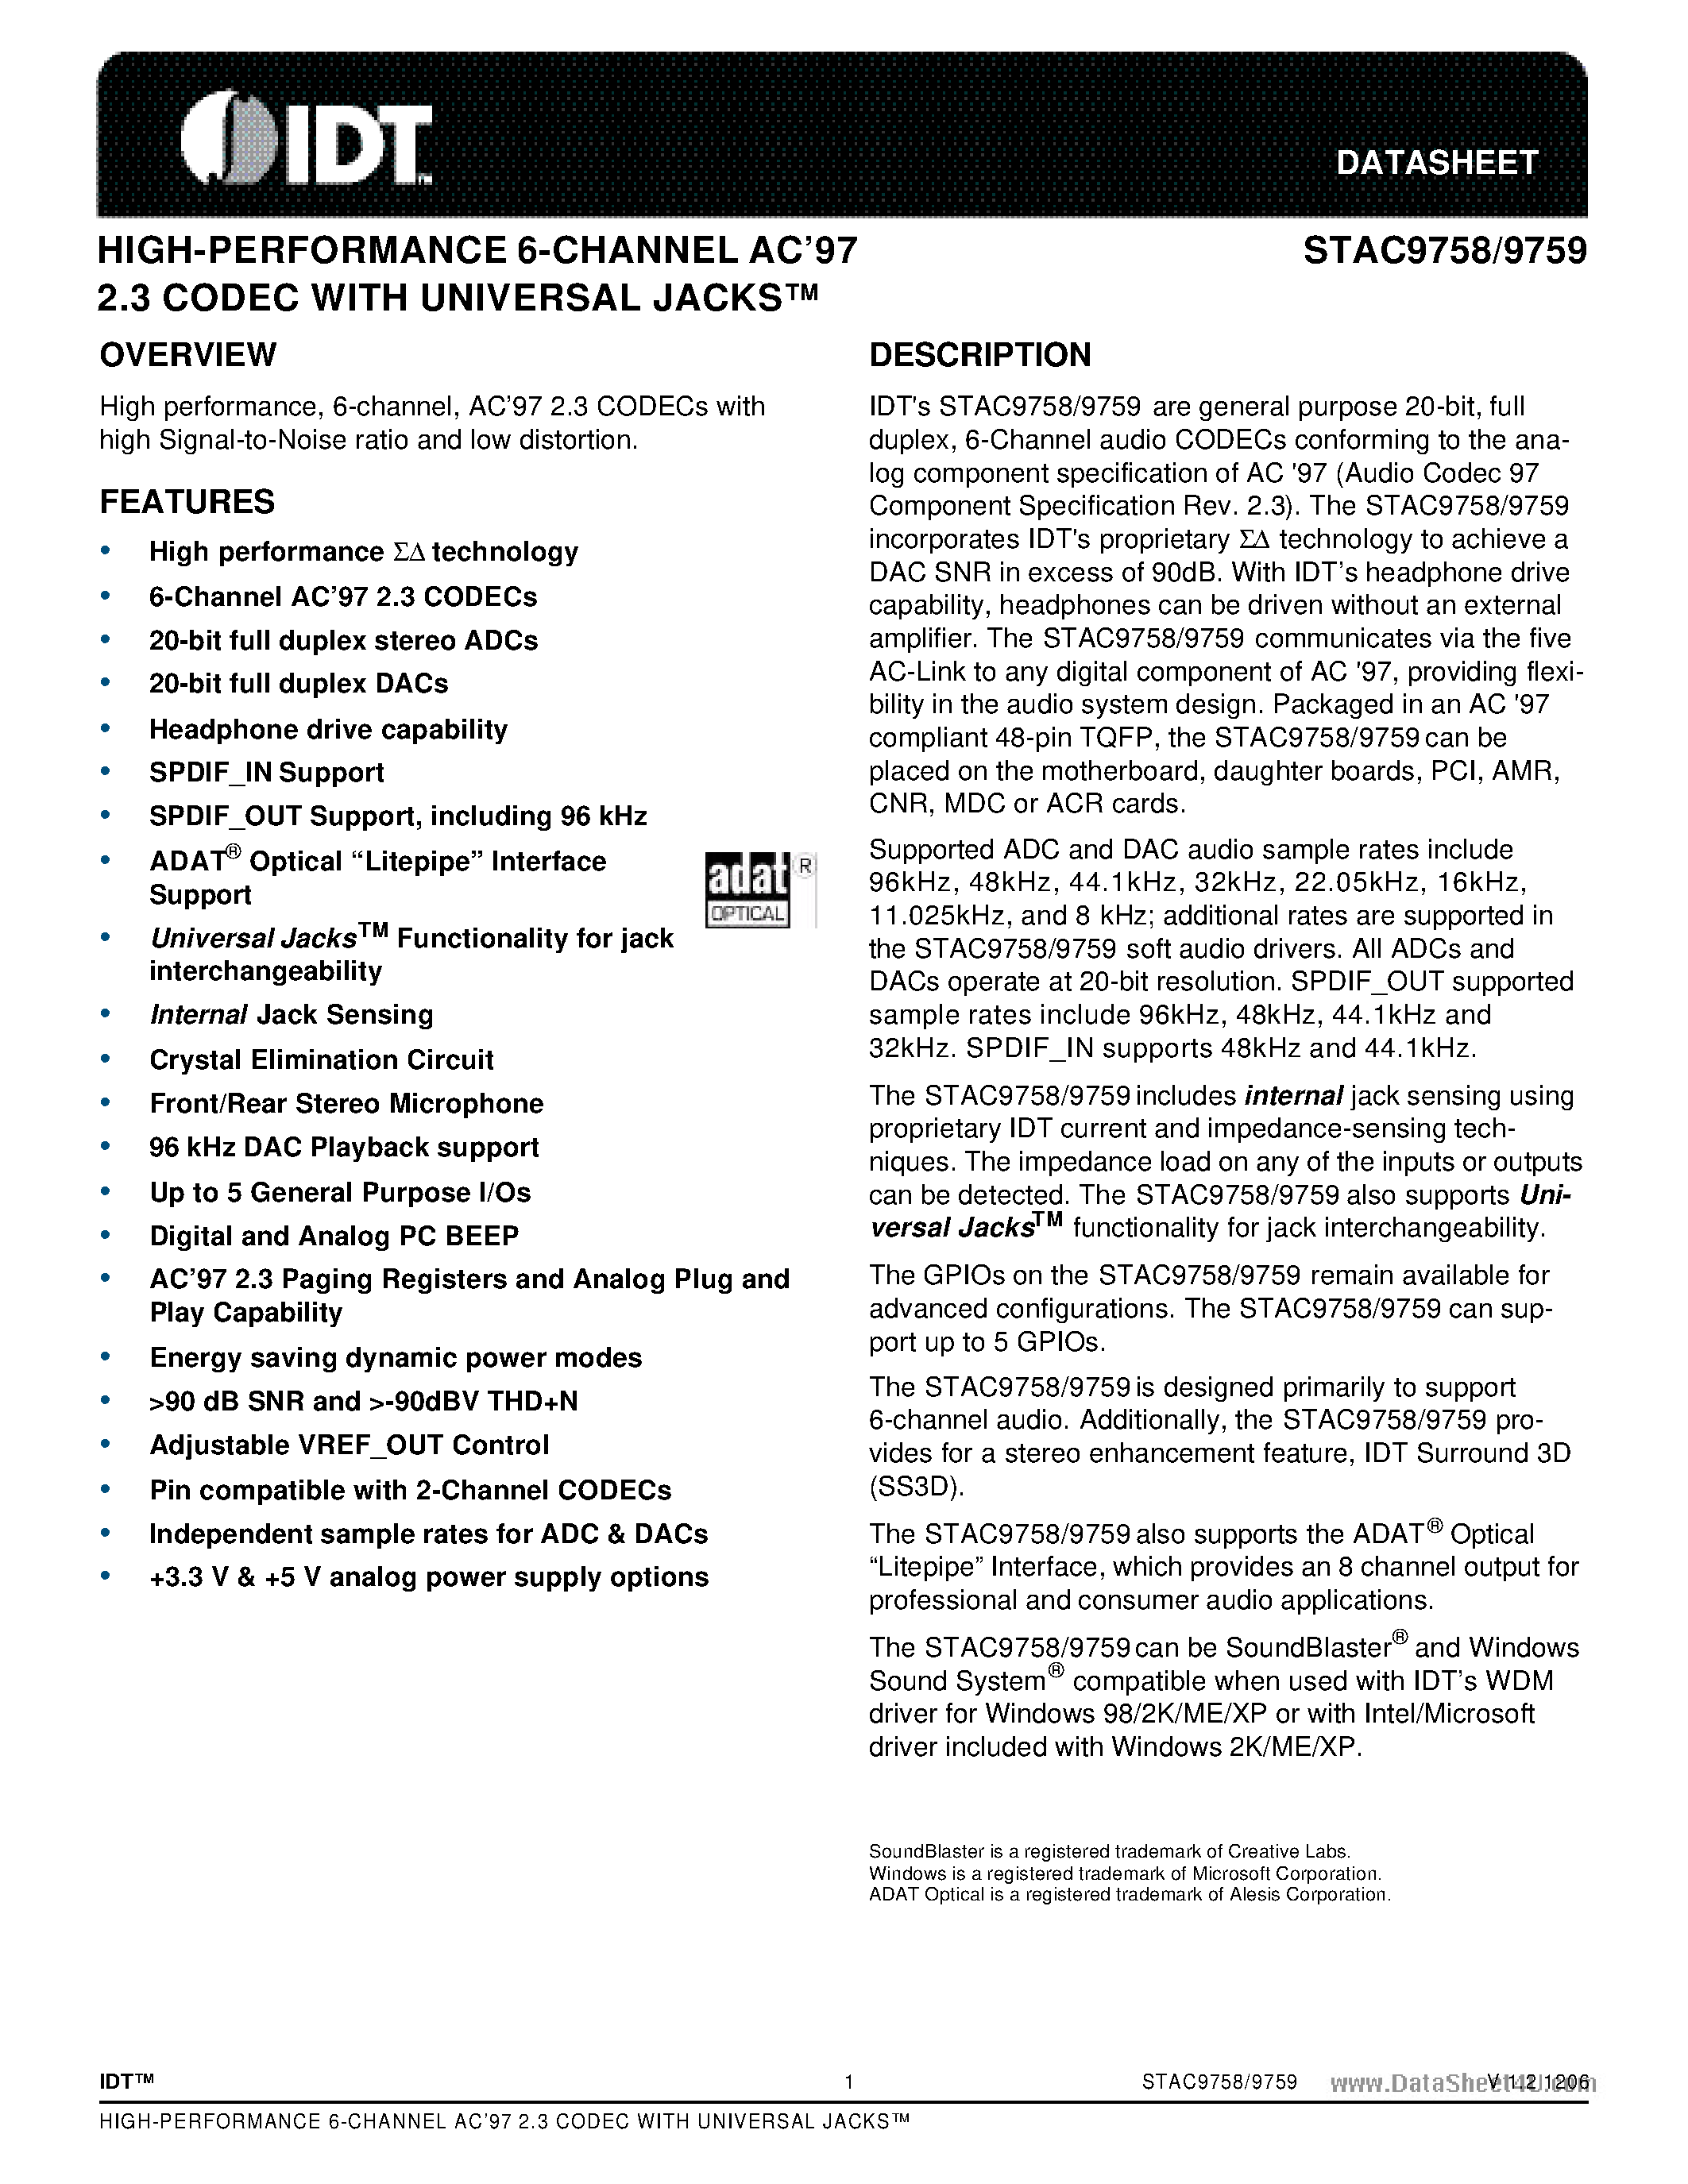 Datasheet STAC9758 - (STAC9758 / STAC9759) HIGH-PERFORMANCE 6-CHANNEL AC97 2.3 CODEC page 1